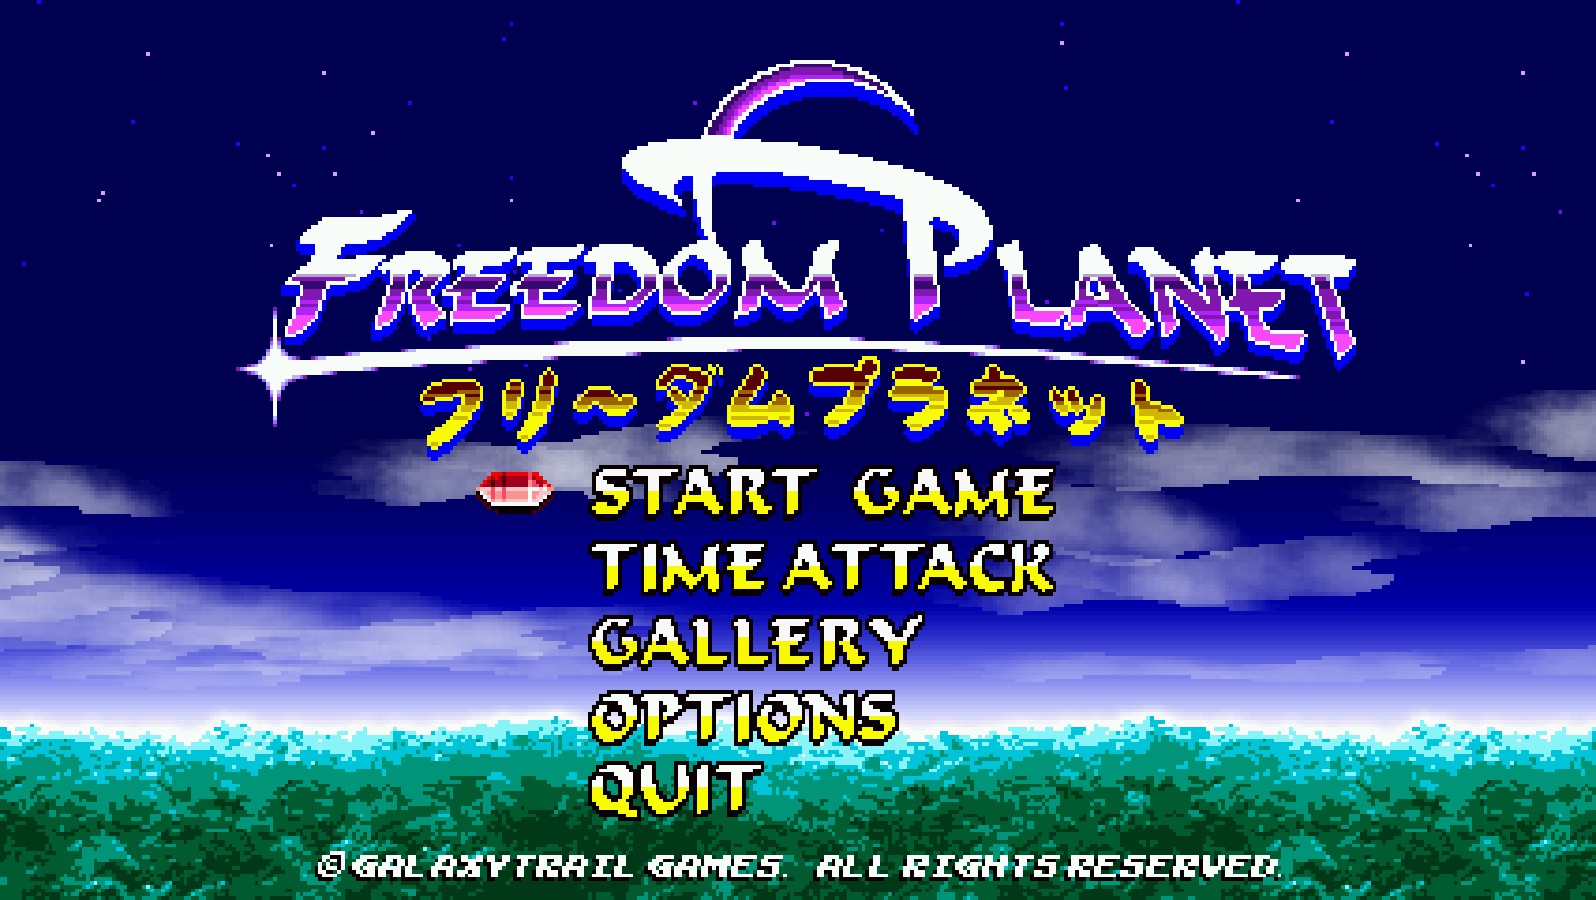 free download freedom planet steam